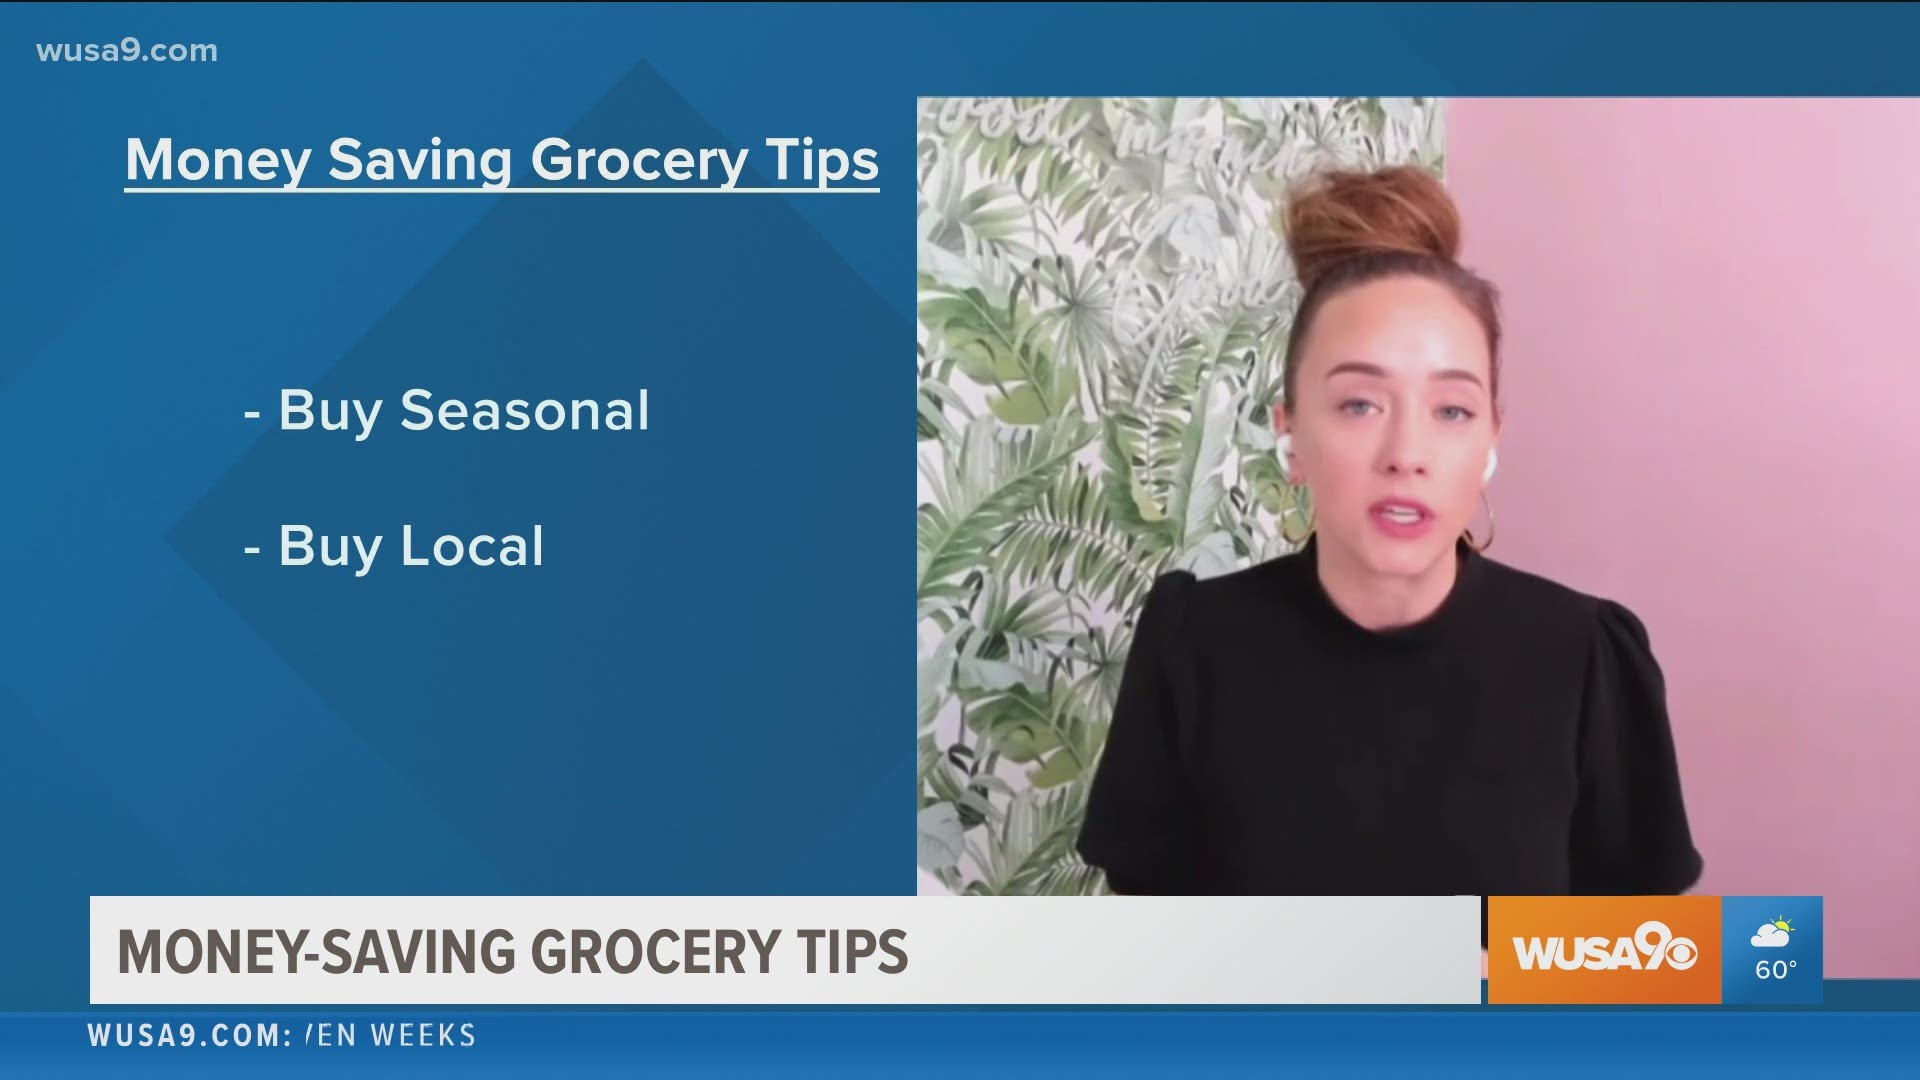 Has COVID-19 sent your grocery bill up?  Check out these tips to save money by Amy Landino.